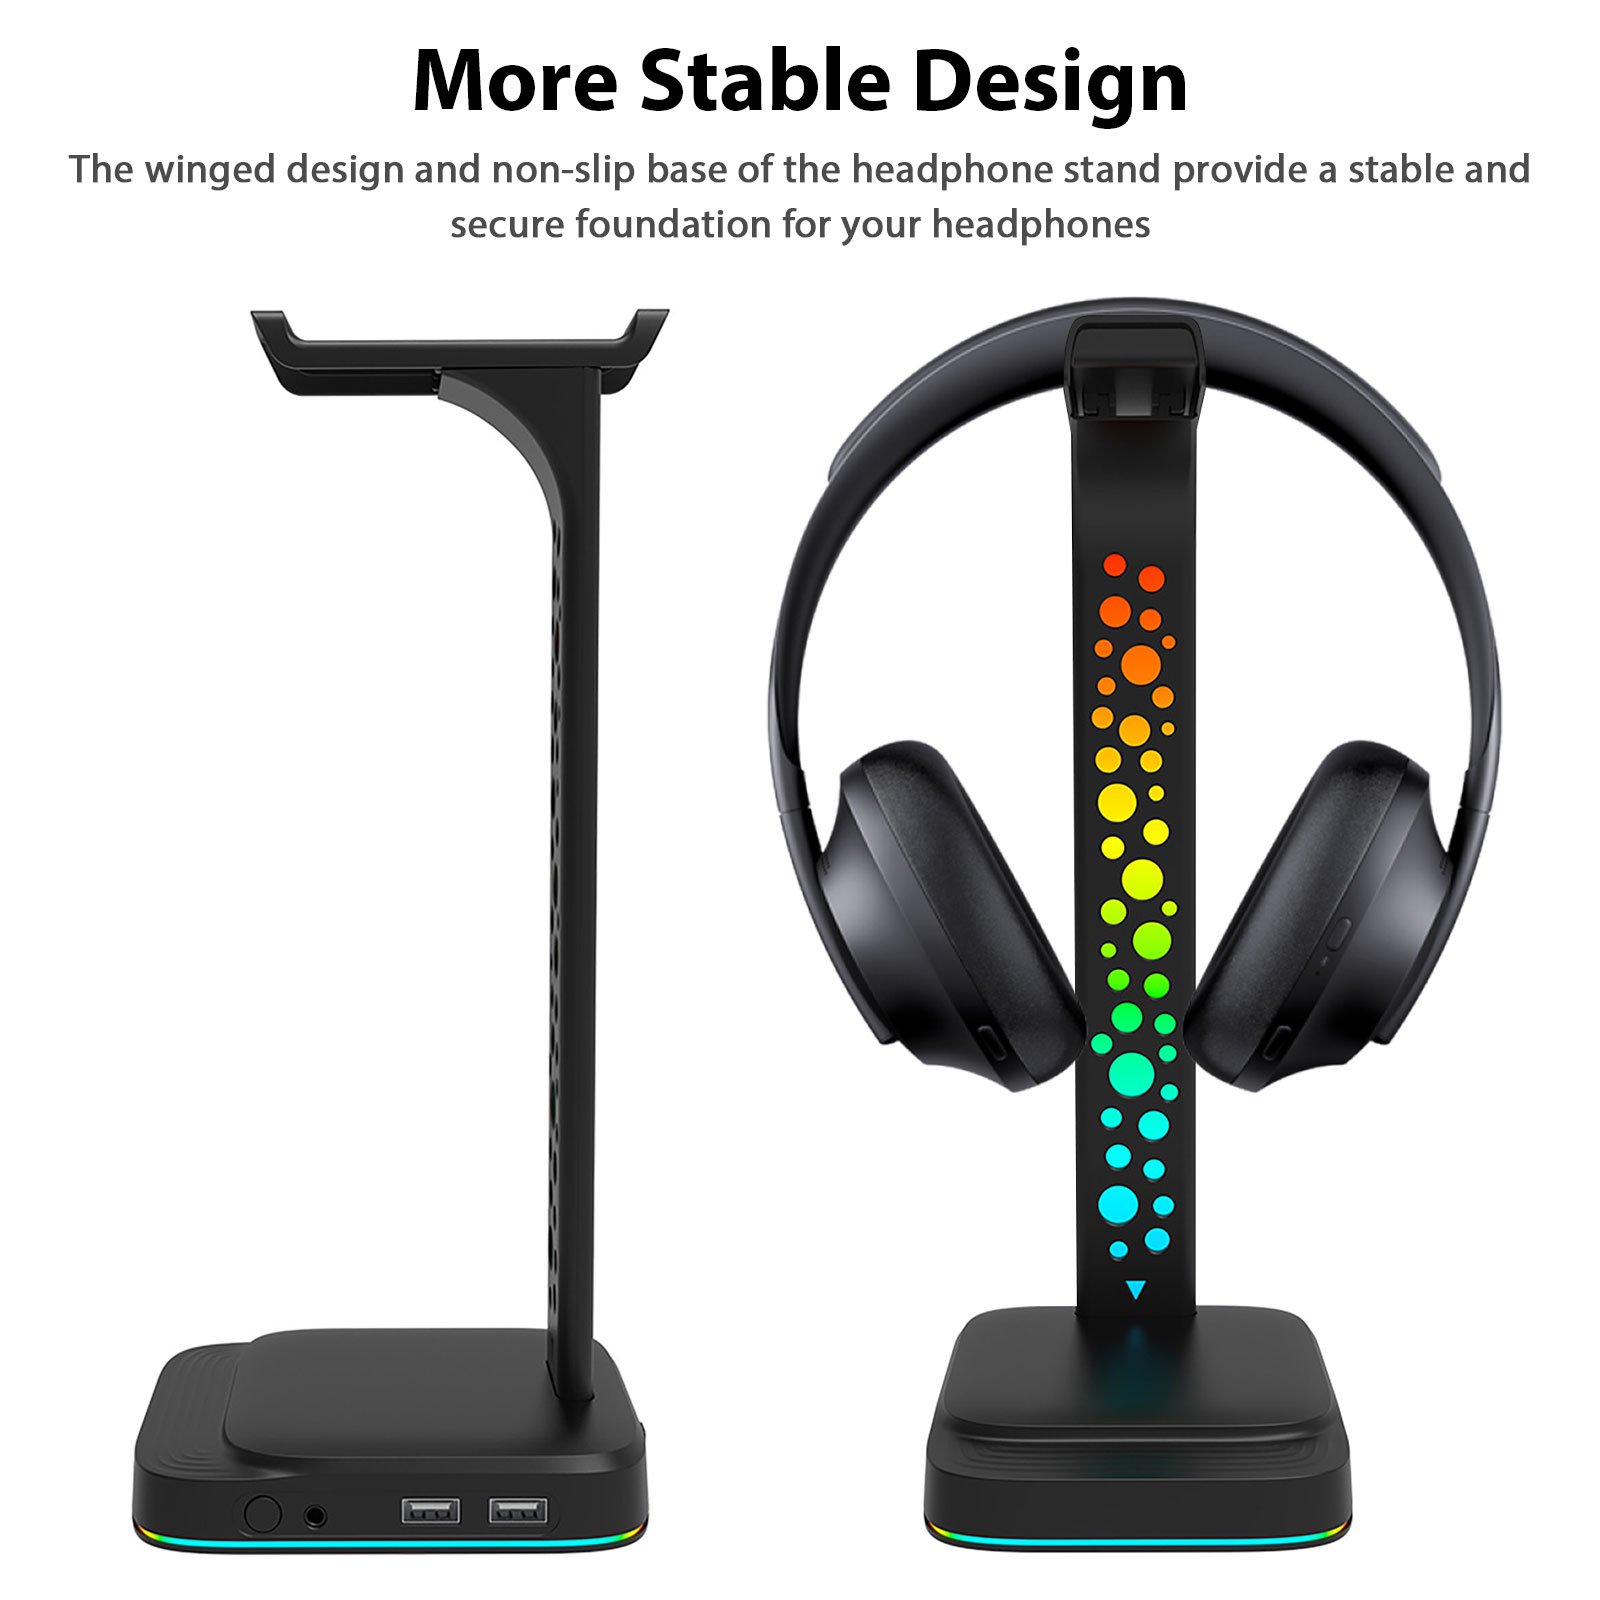 Headphones-Gaming-Headset-Stand-RGB-Headphone-Stand-with-3-5mm-AUX-2-USB-Charging-Ports-Headphone-Holder-with-10-Light-Modes-Gaming-Headset-for-Gamers-PC-33